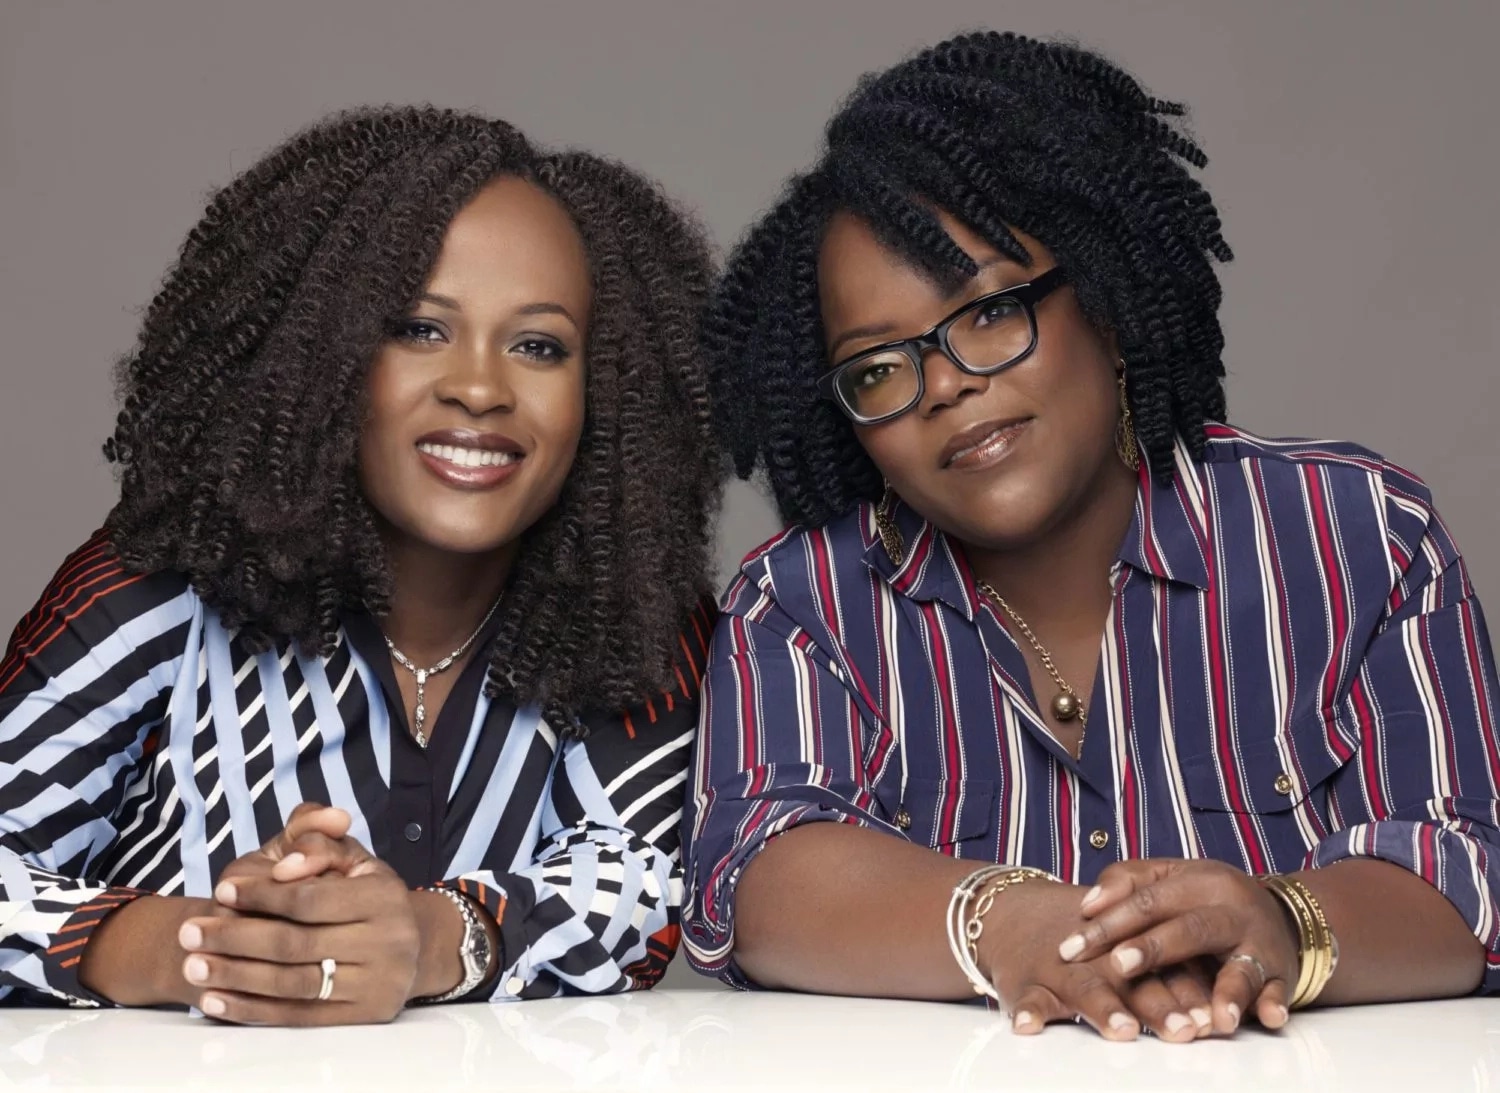 These Nigerian sisters developed skin products designed specially for dark skins